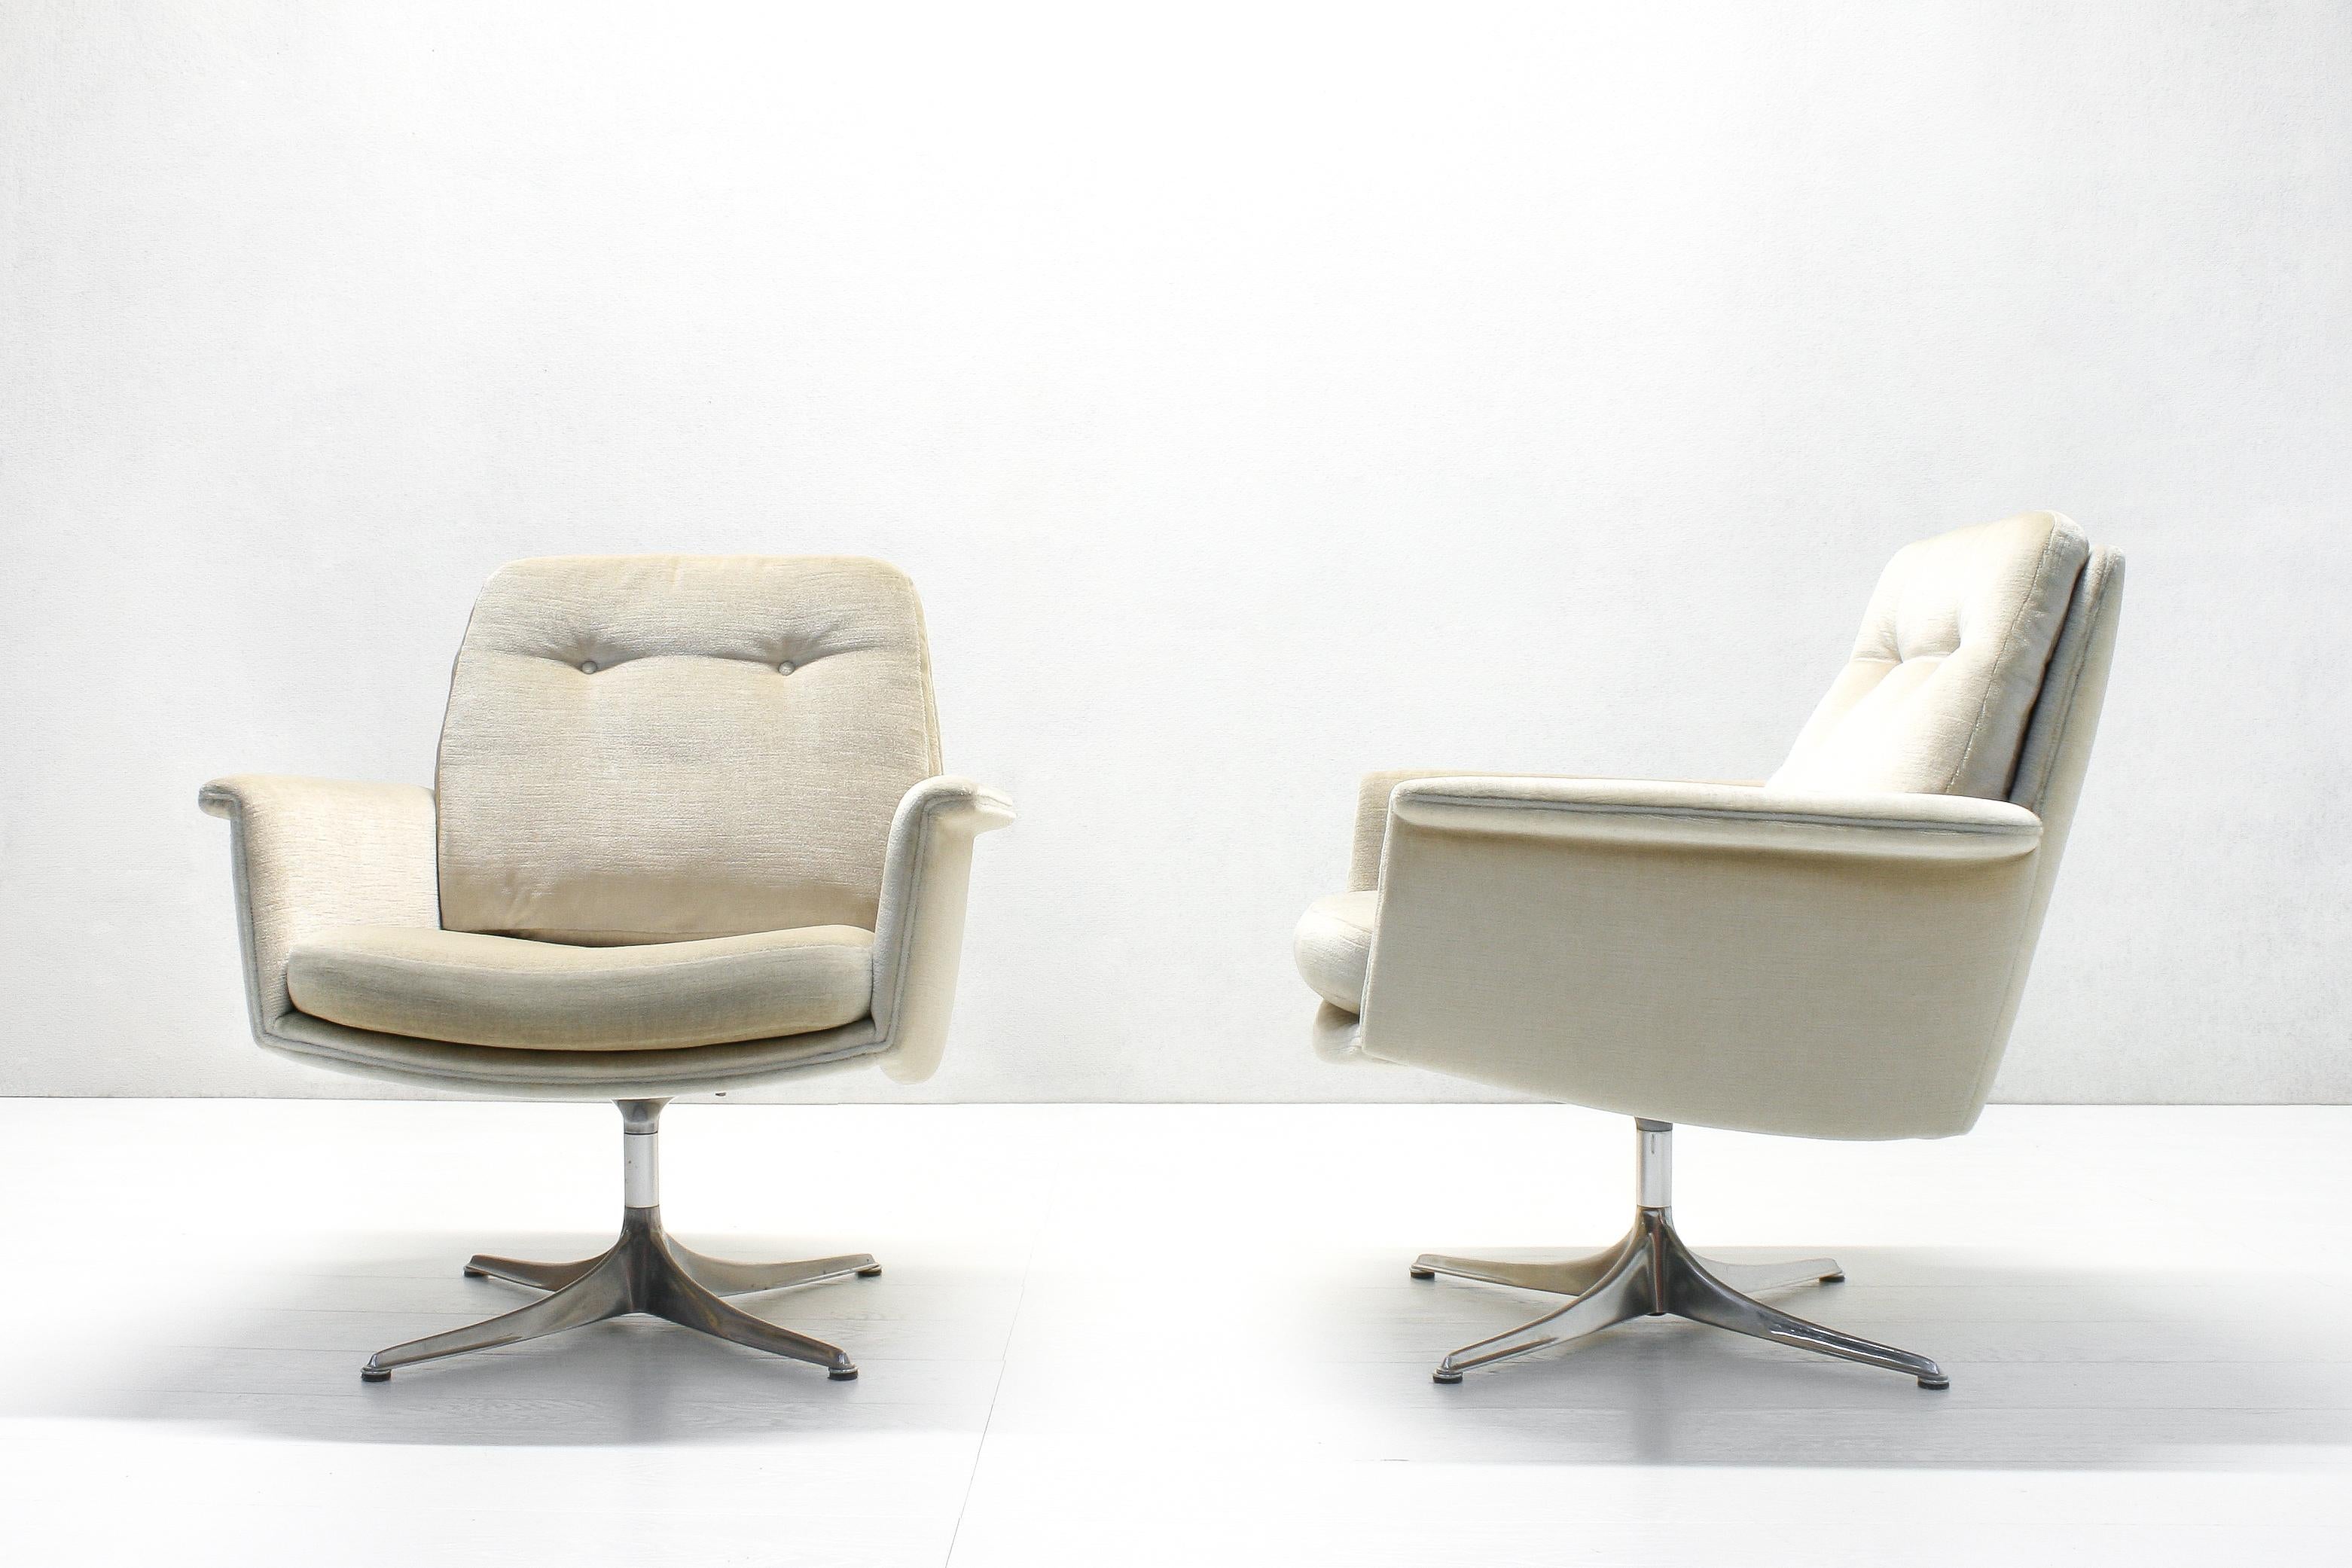 Pair of Velvet Sedia Lounge Chairs by Horst Brüning for COR, Germany, 1960s For Sale 5